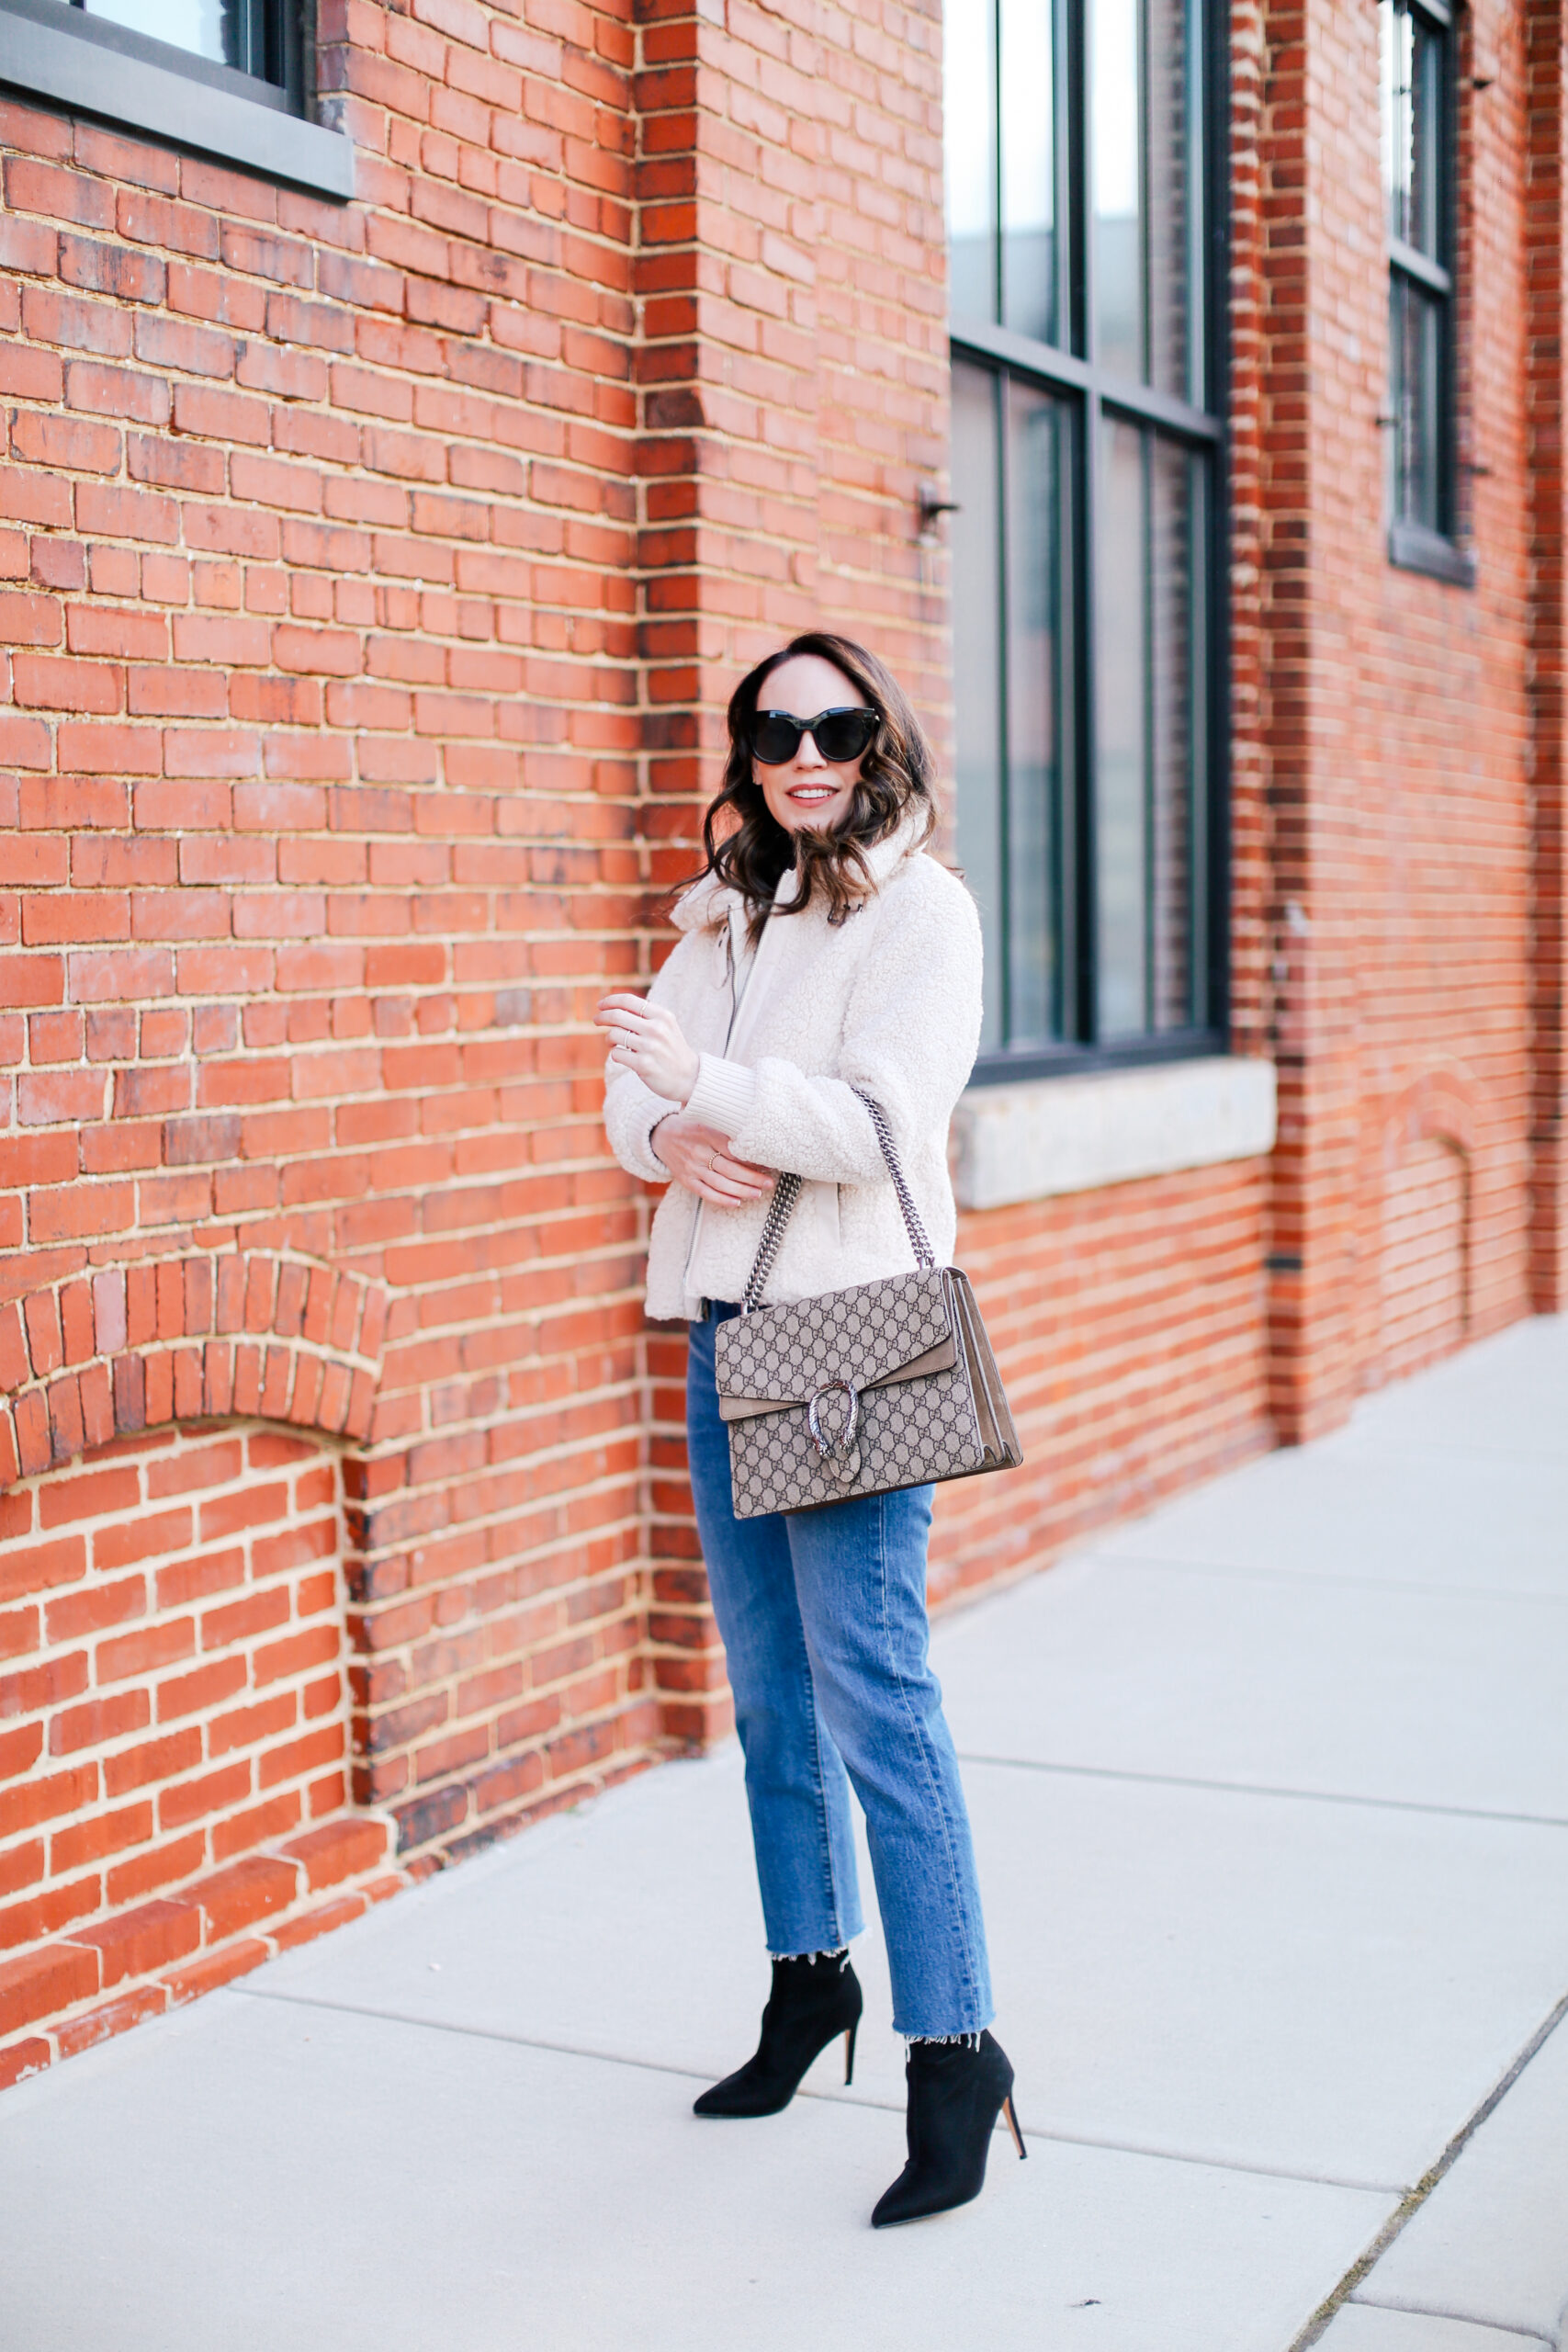 Black Ankle Boots I'm Loving That Are On Major Sale (under $50 ...